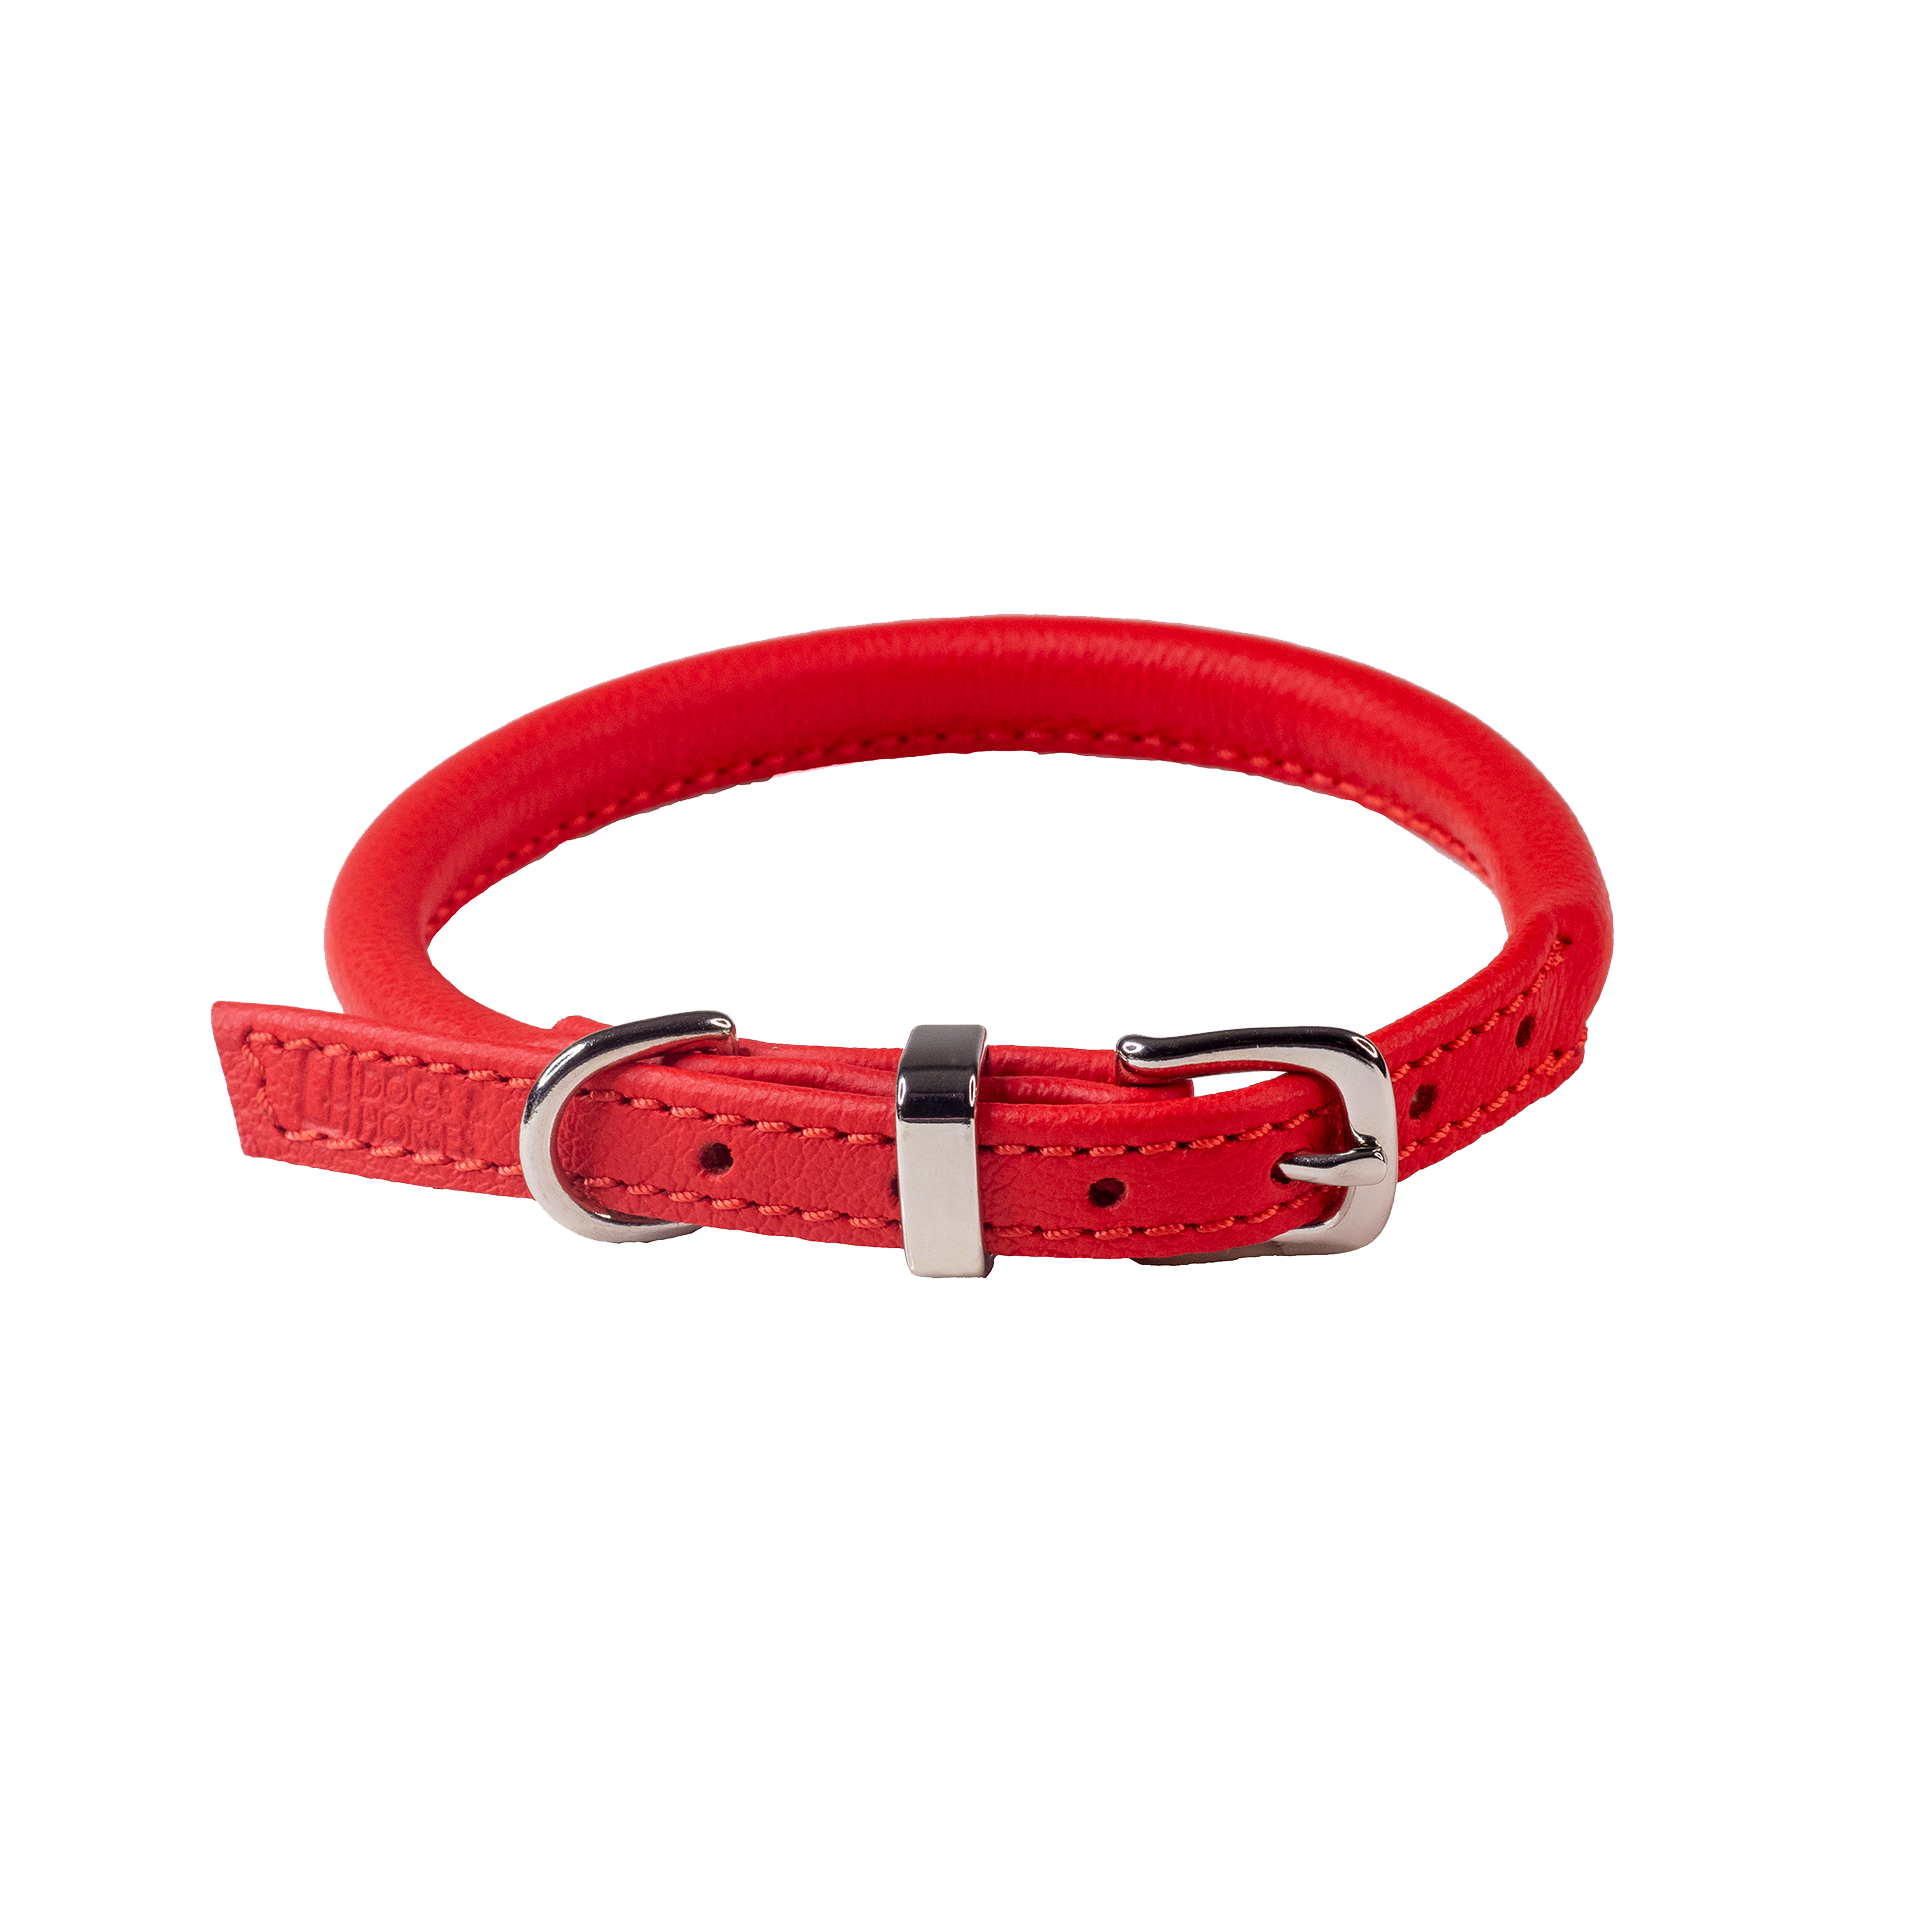 The rolled leather collar is ideal for dogs with long or curly coats. The rolled construction helps to prevent knots forming in the coat (lookin&